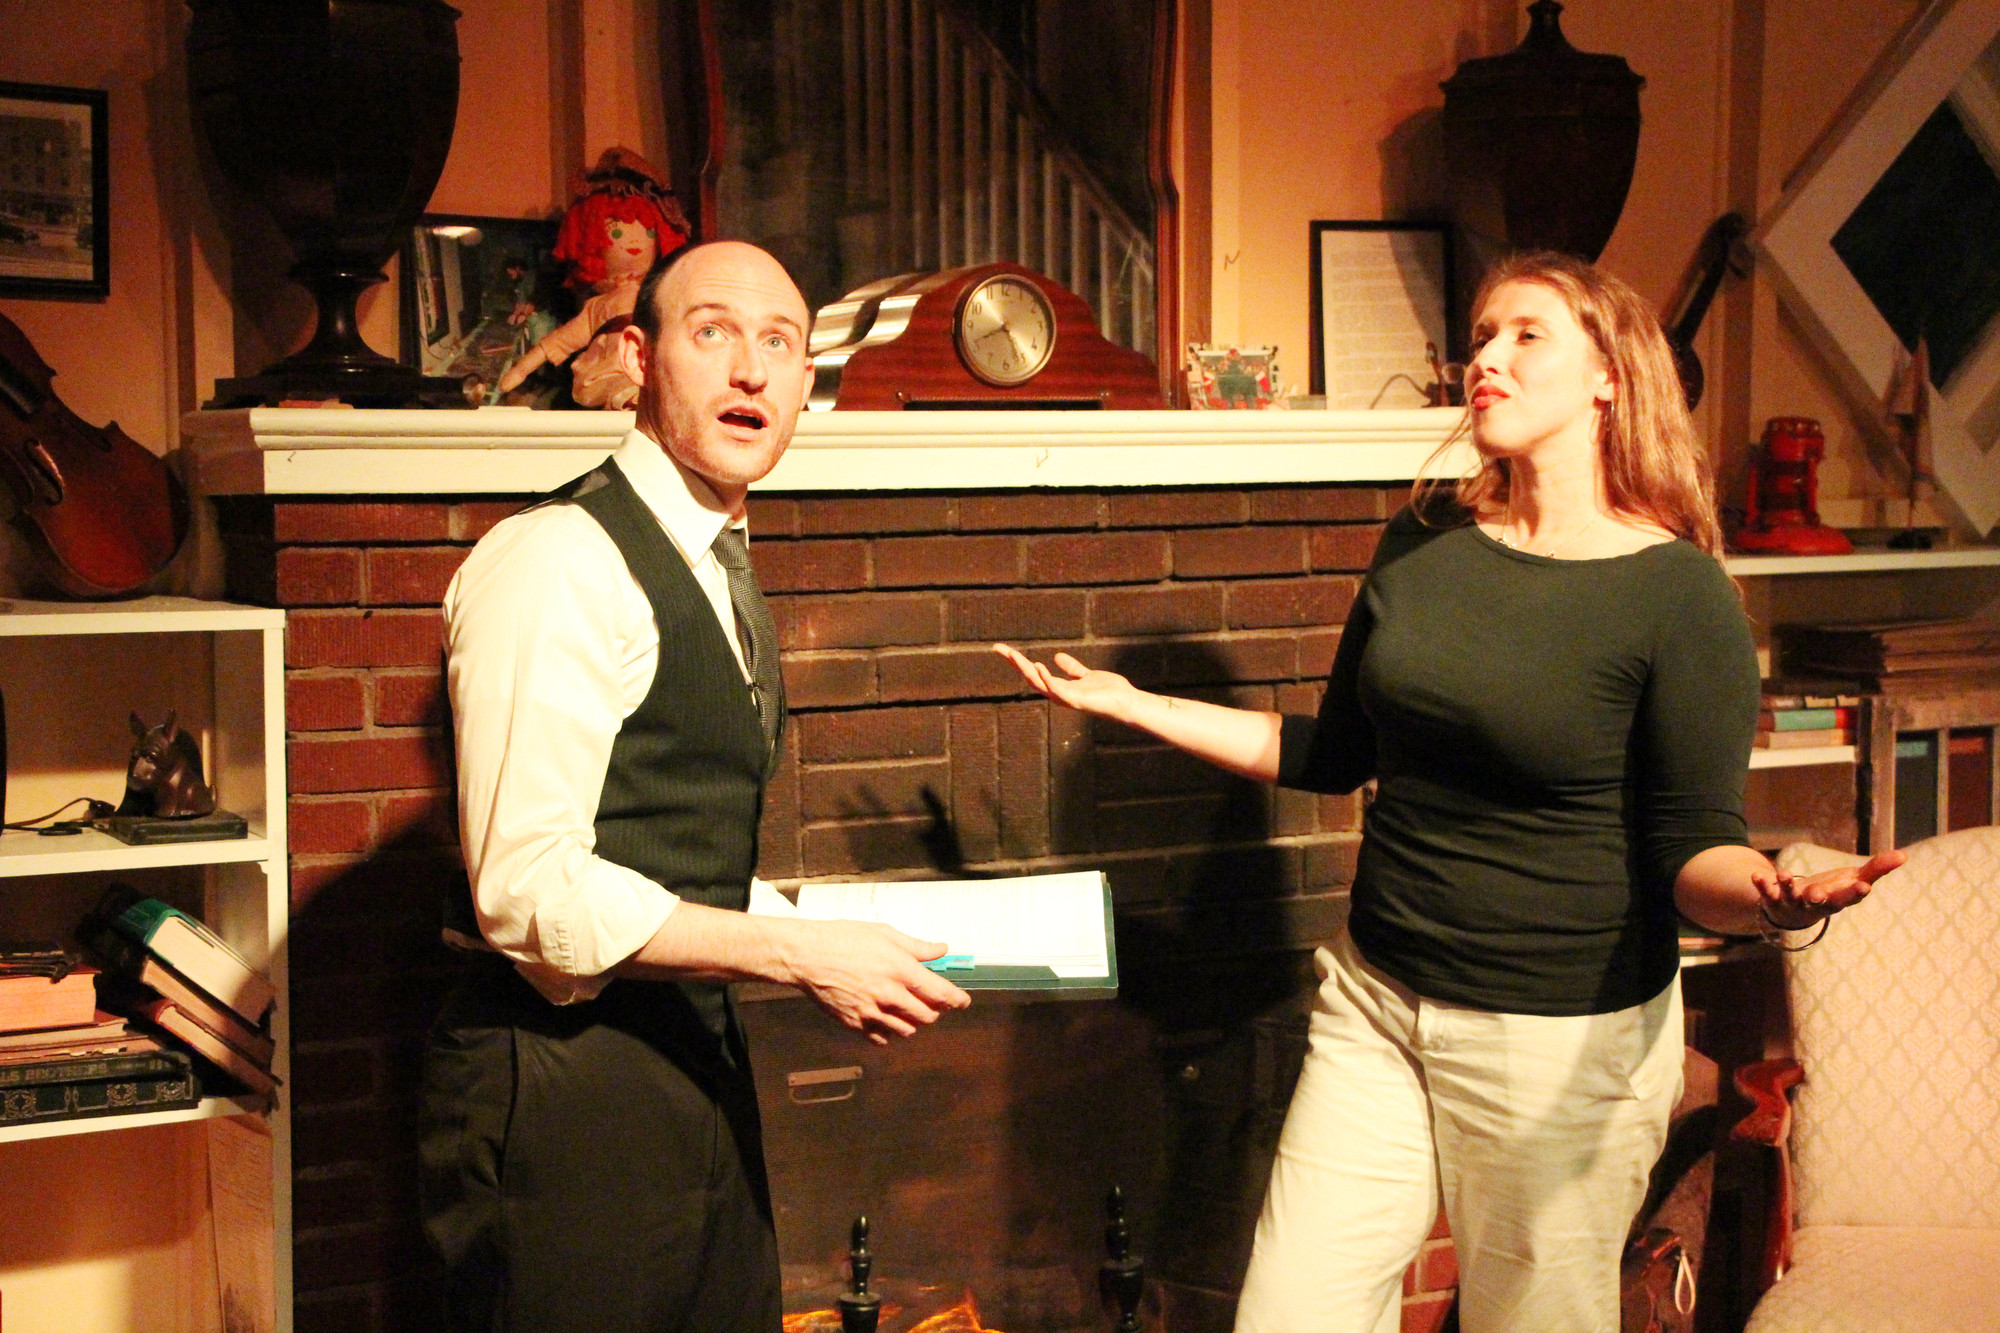 Malverne Community Theatre President David Coonan and Stephanie Ciantro performed stories of the Grimm Brothers.